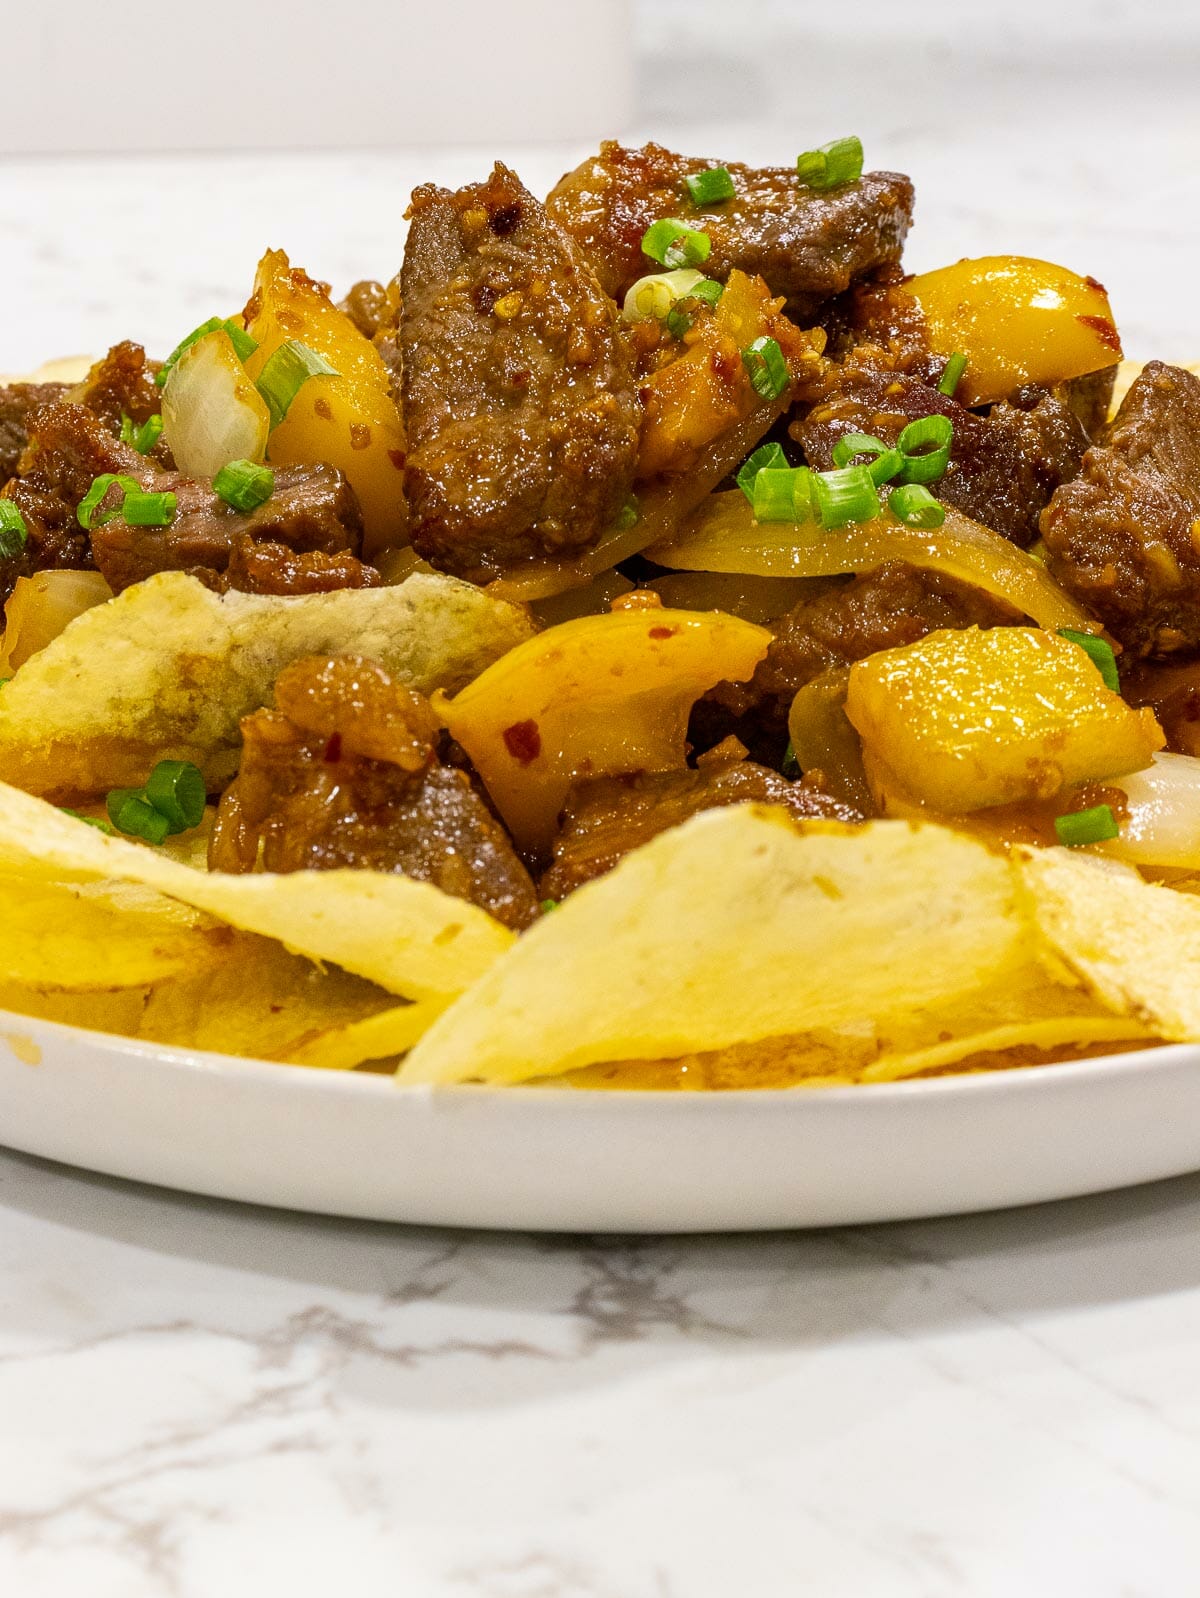 a dish of sauteed beef on the bed of potato chips